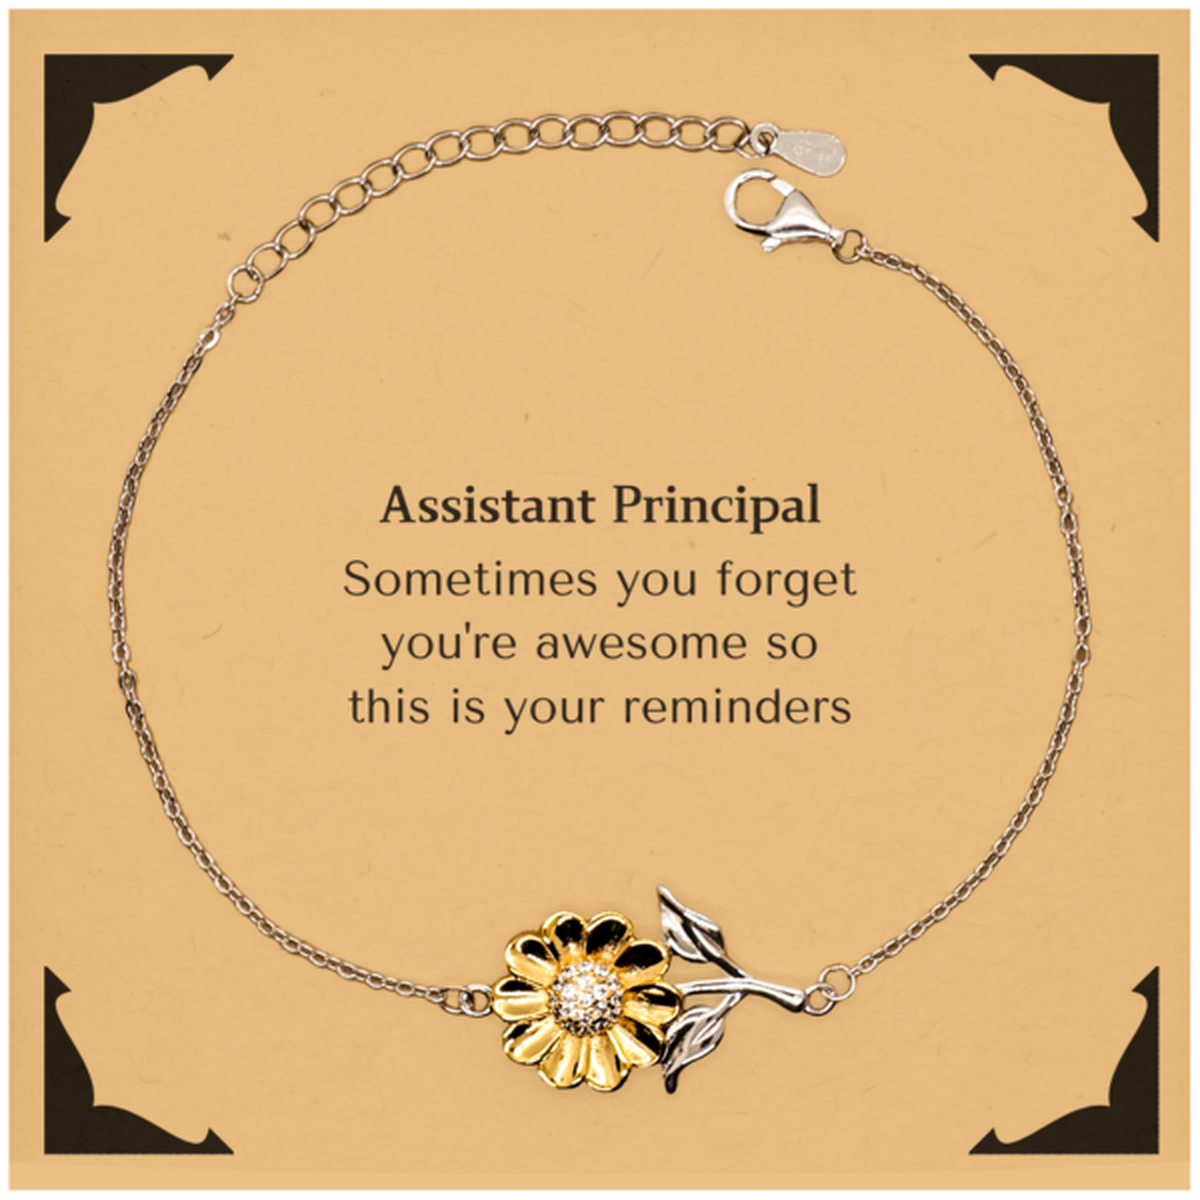 Sentimental Assistant Principal Sunflower Bracelet, Assistant Principal Sometimes you forget you're awesome so this is your reminders, Graduation Christmas Birthday Gifts for Assistant Principal, Men, Women, Coworkers